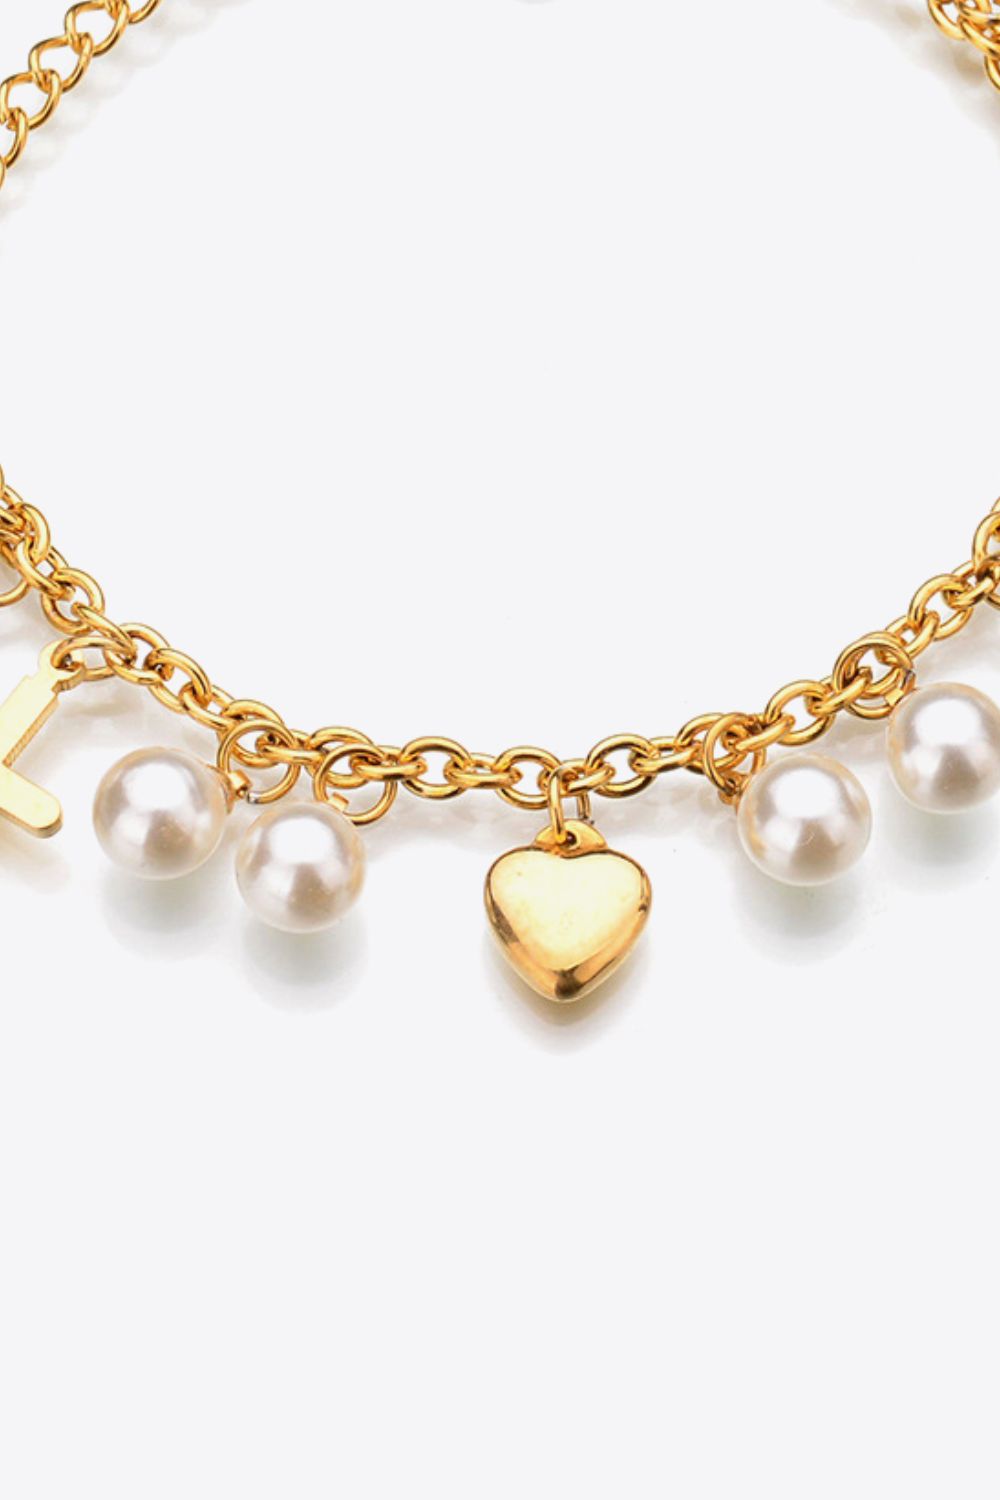 Heart Cross and Pearl Charm Stainless Steel Bracelet - Gold / One Size - T-Shirts - Bracelets - 2 - 2024